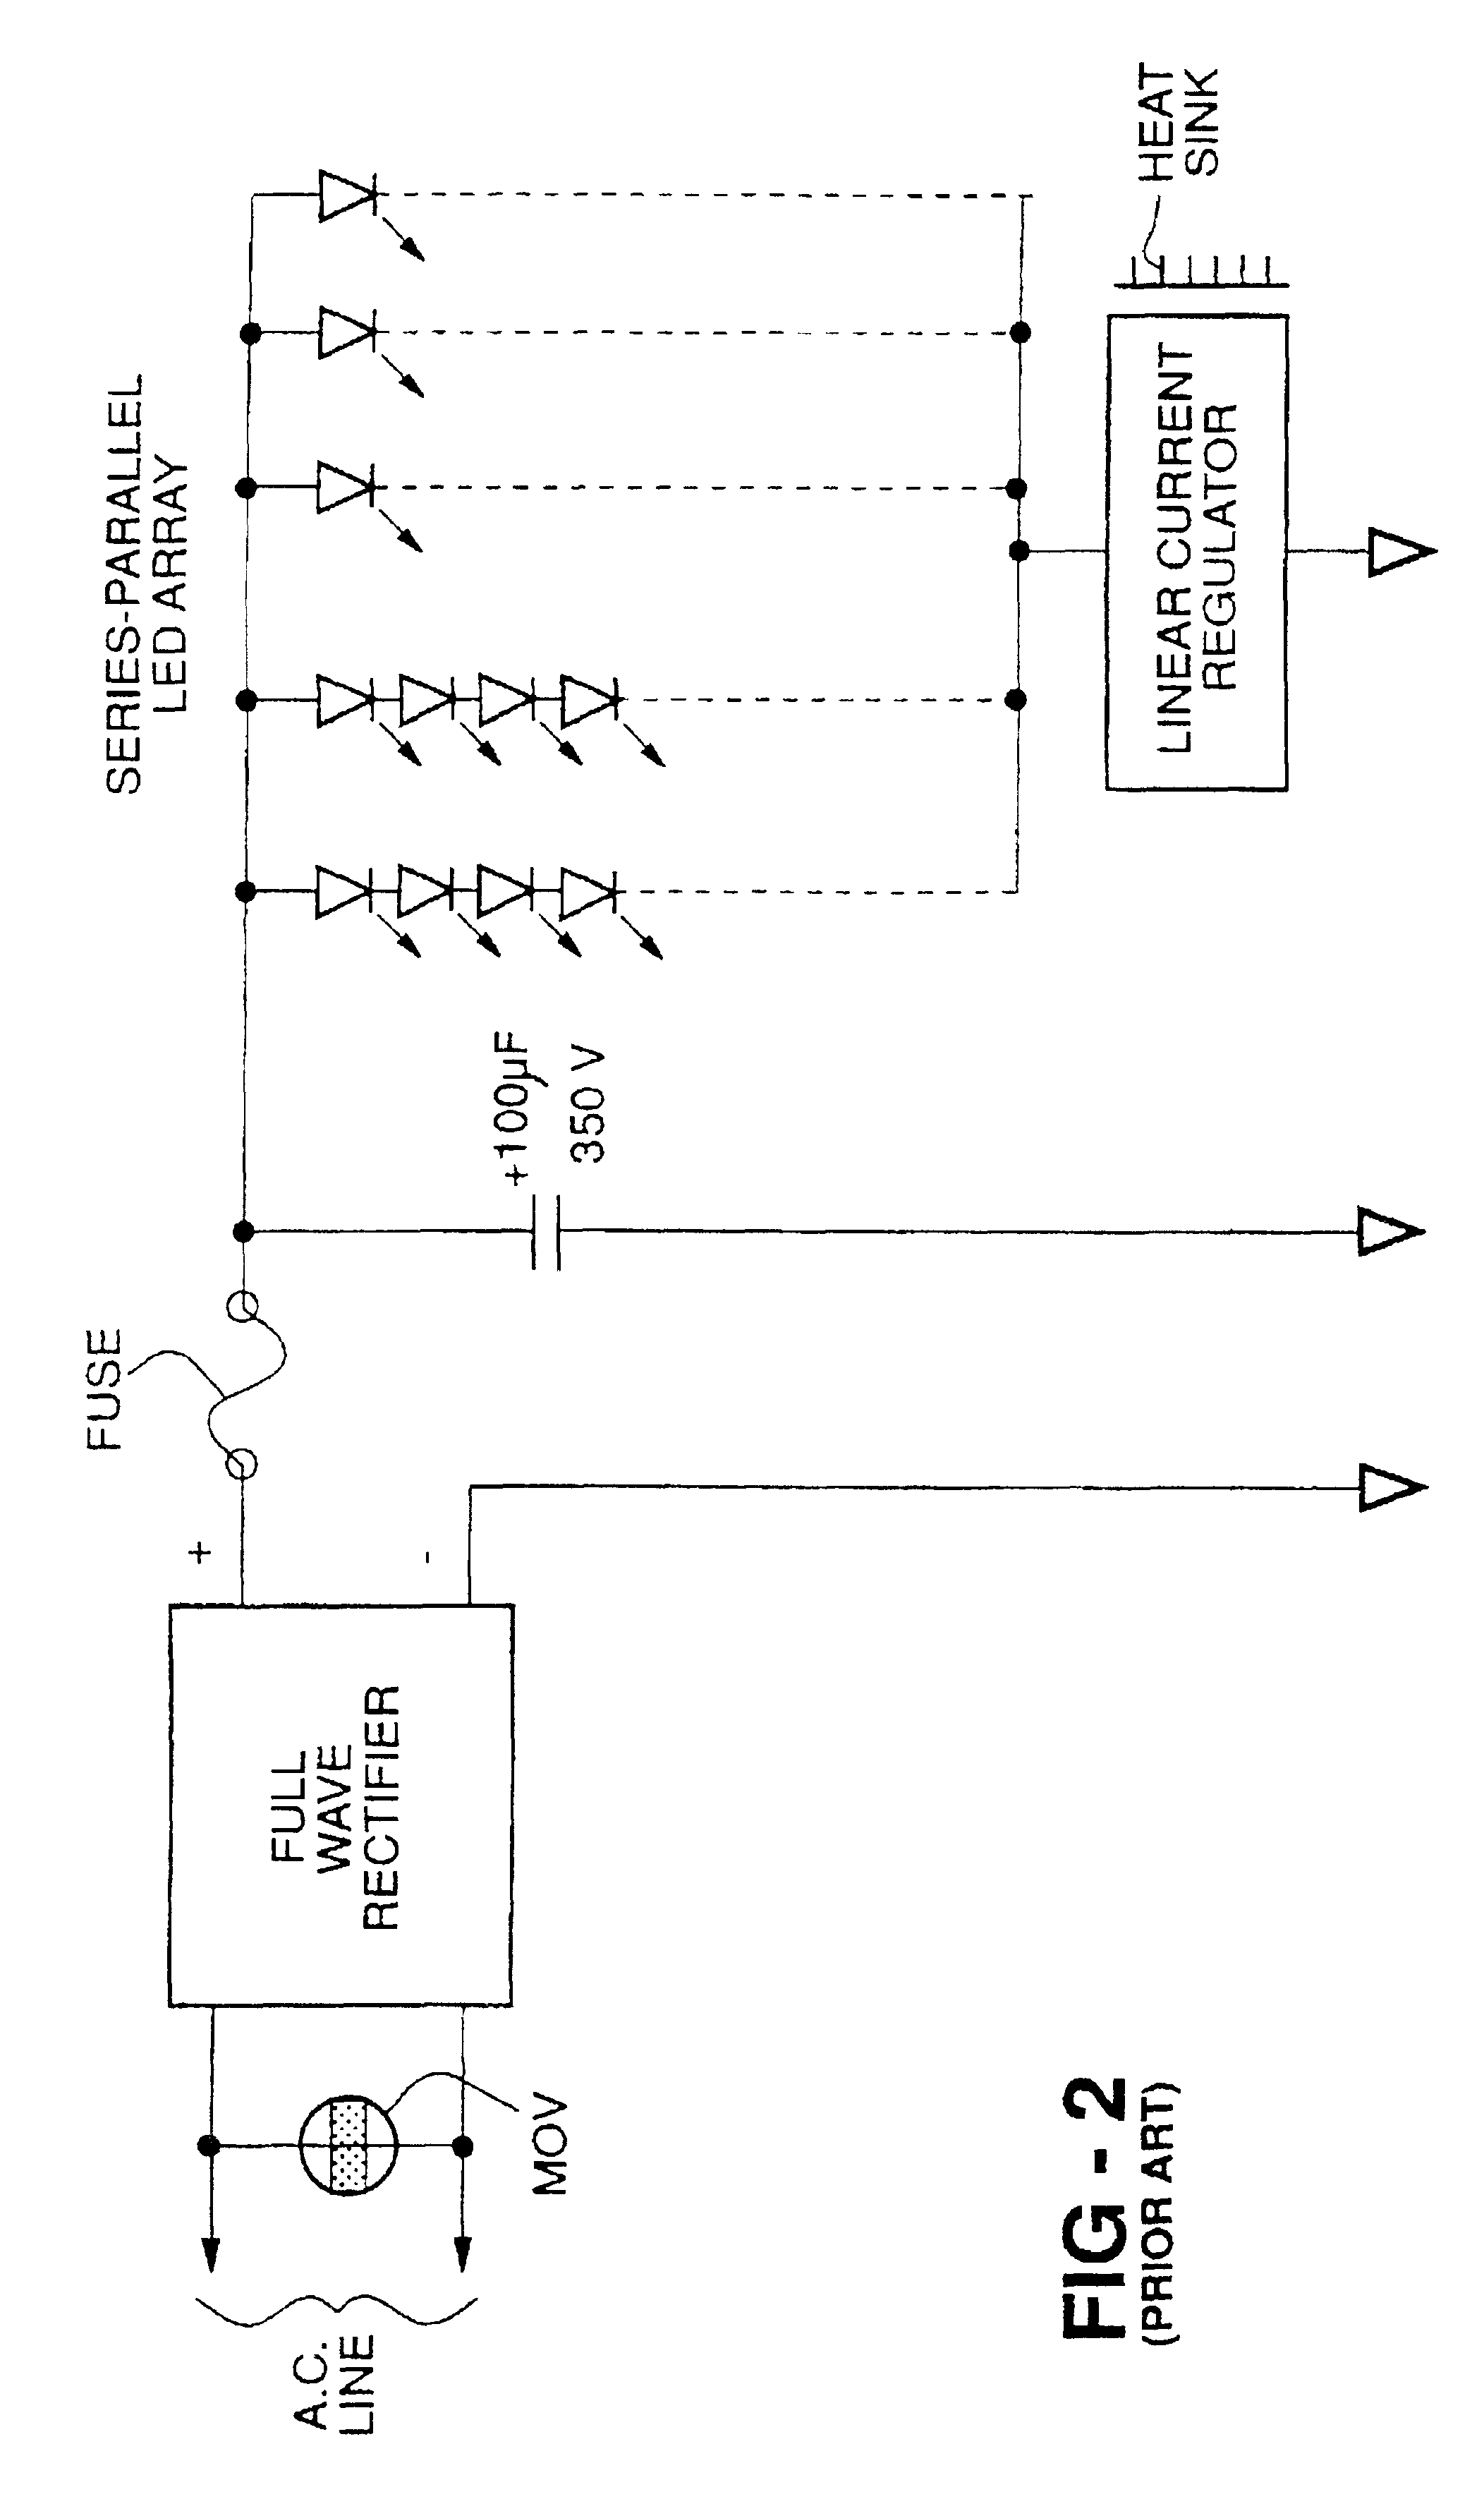 Power supply for light emitting diode array